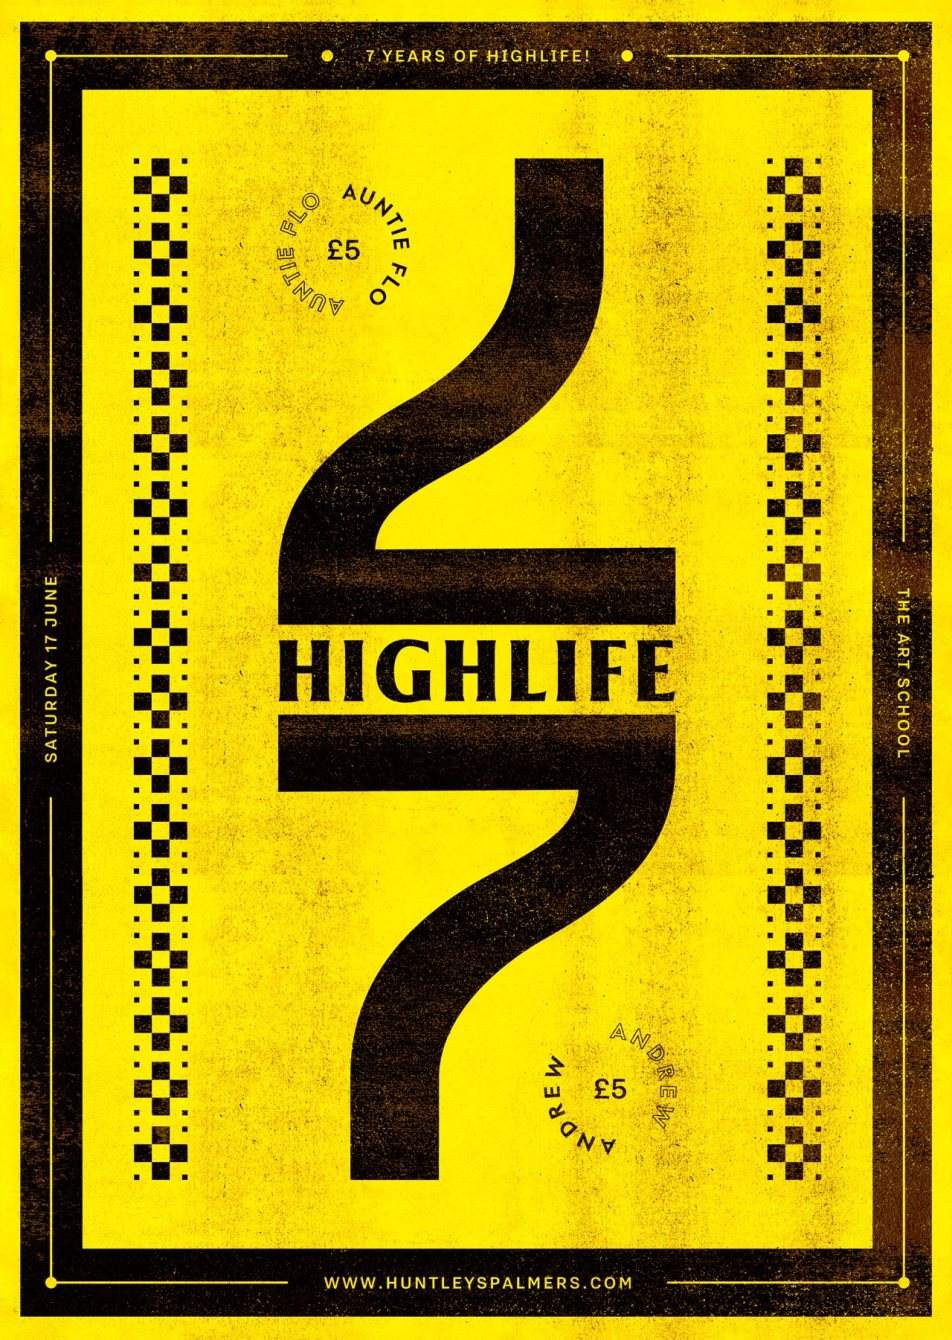 7 Years of Highlife with Auntie Flo + Andrew - フライヤー表